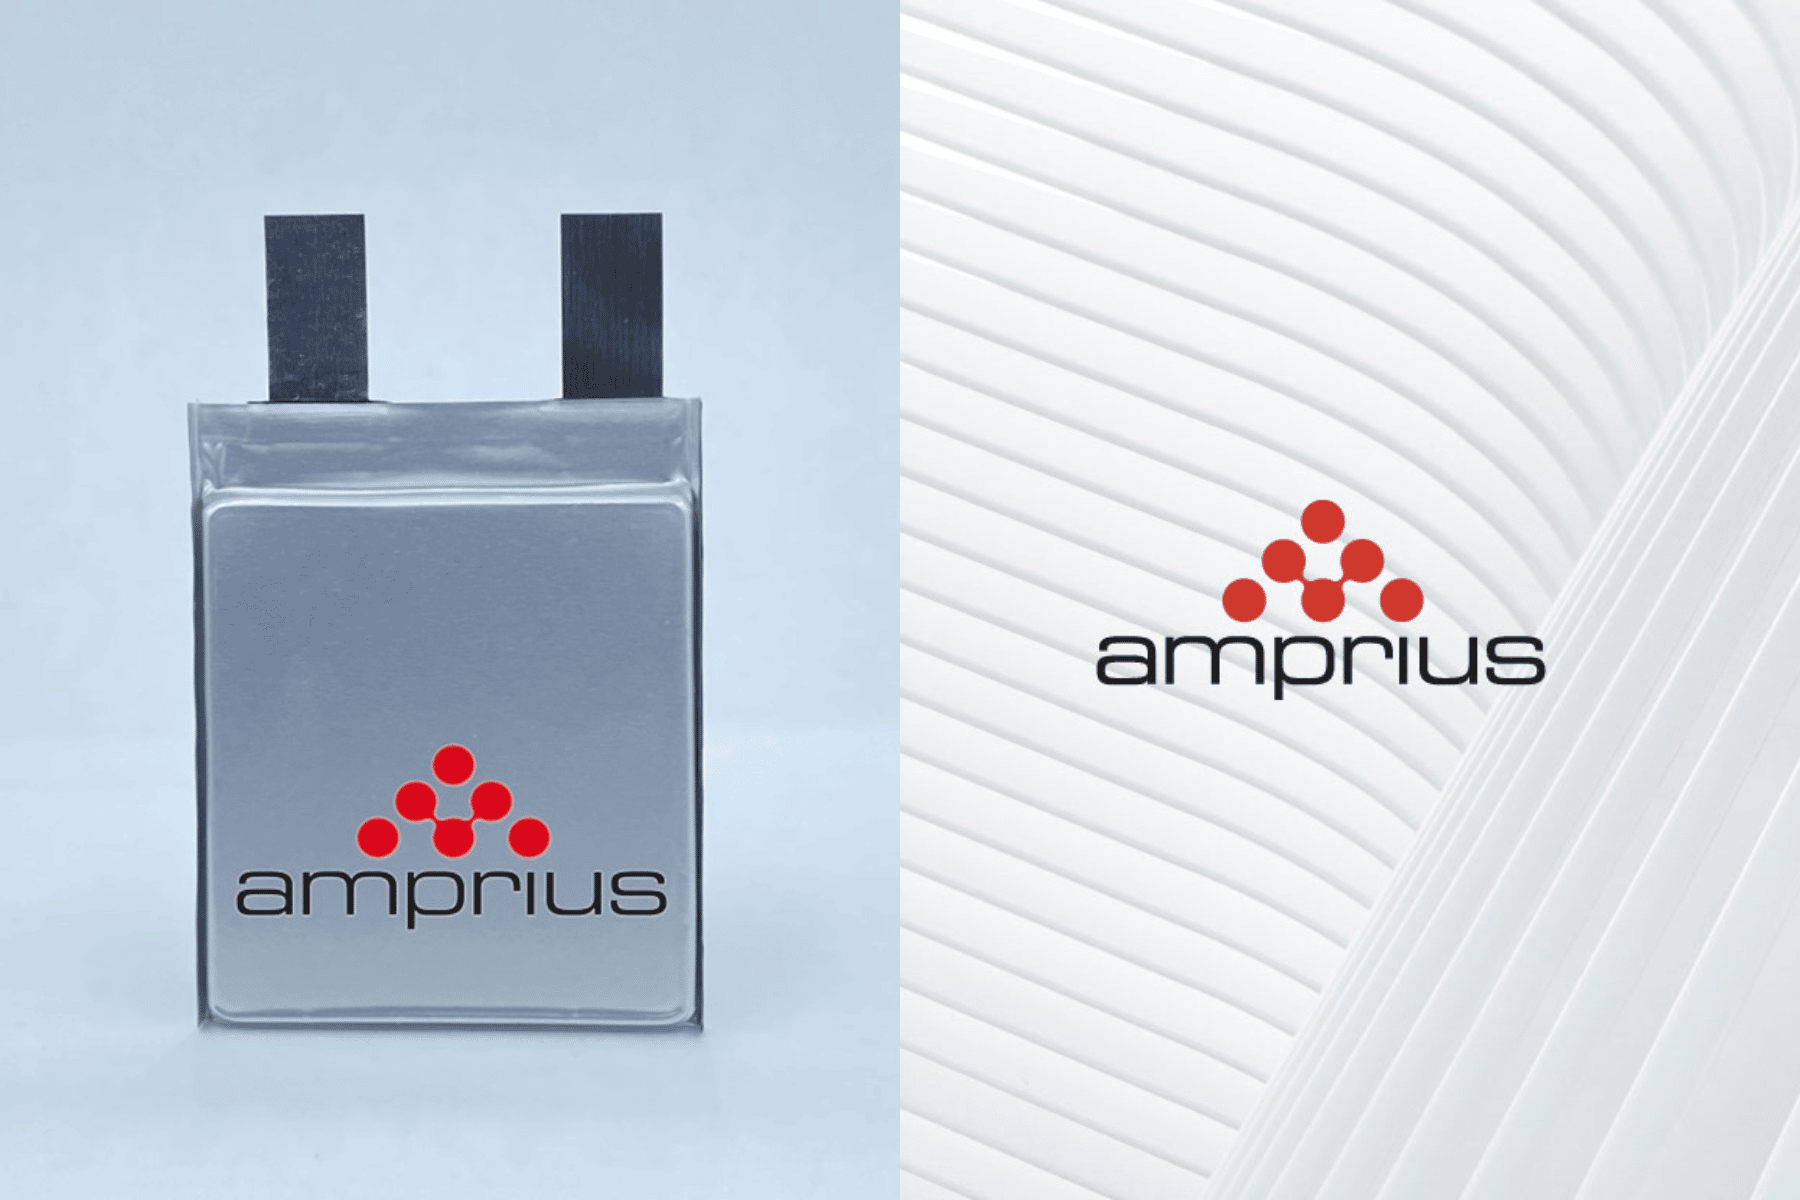 Amprius Technologies to Host Extreme Fast Charge Demonstration of One of Its Commercially Available Batteries